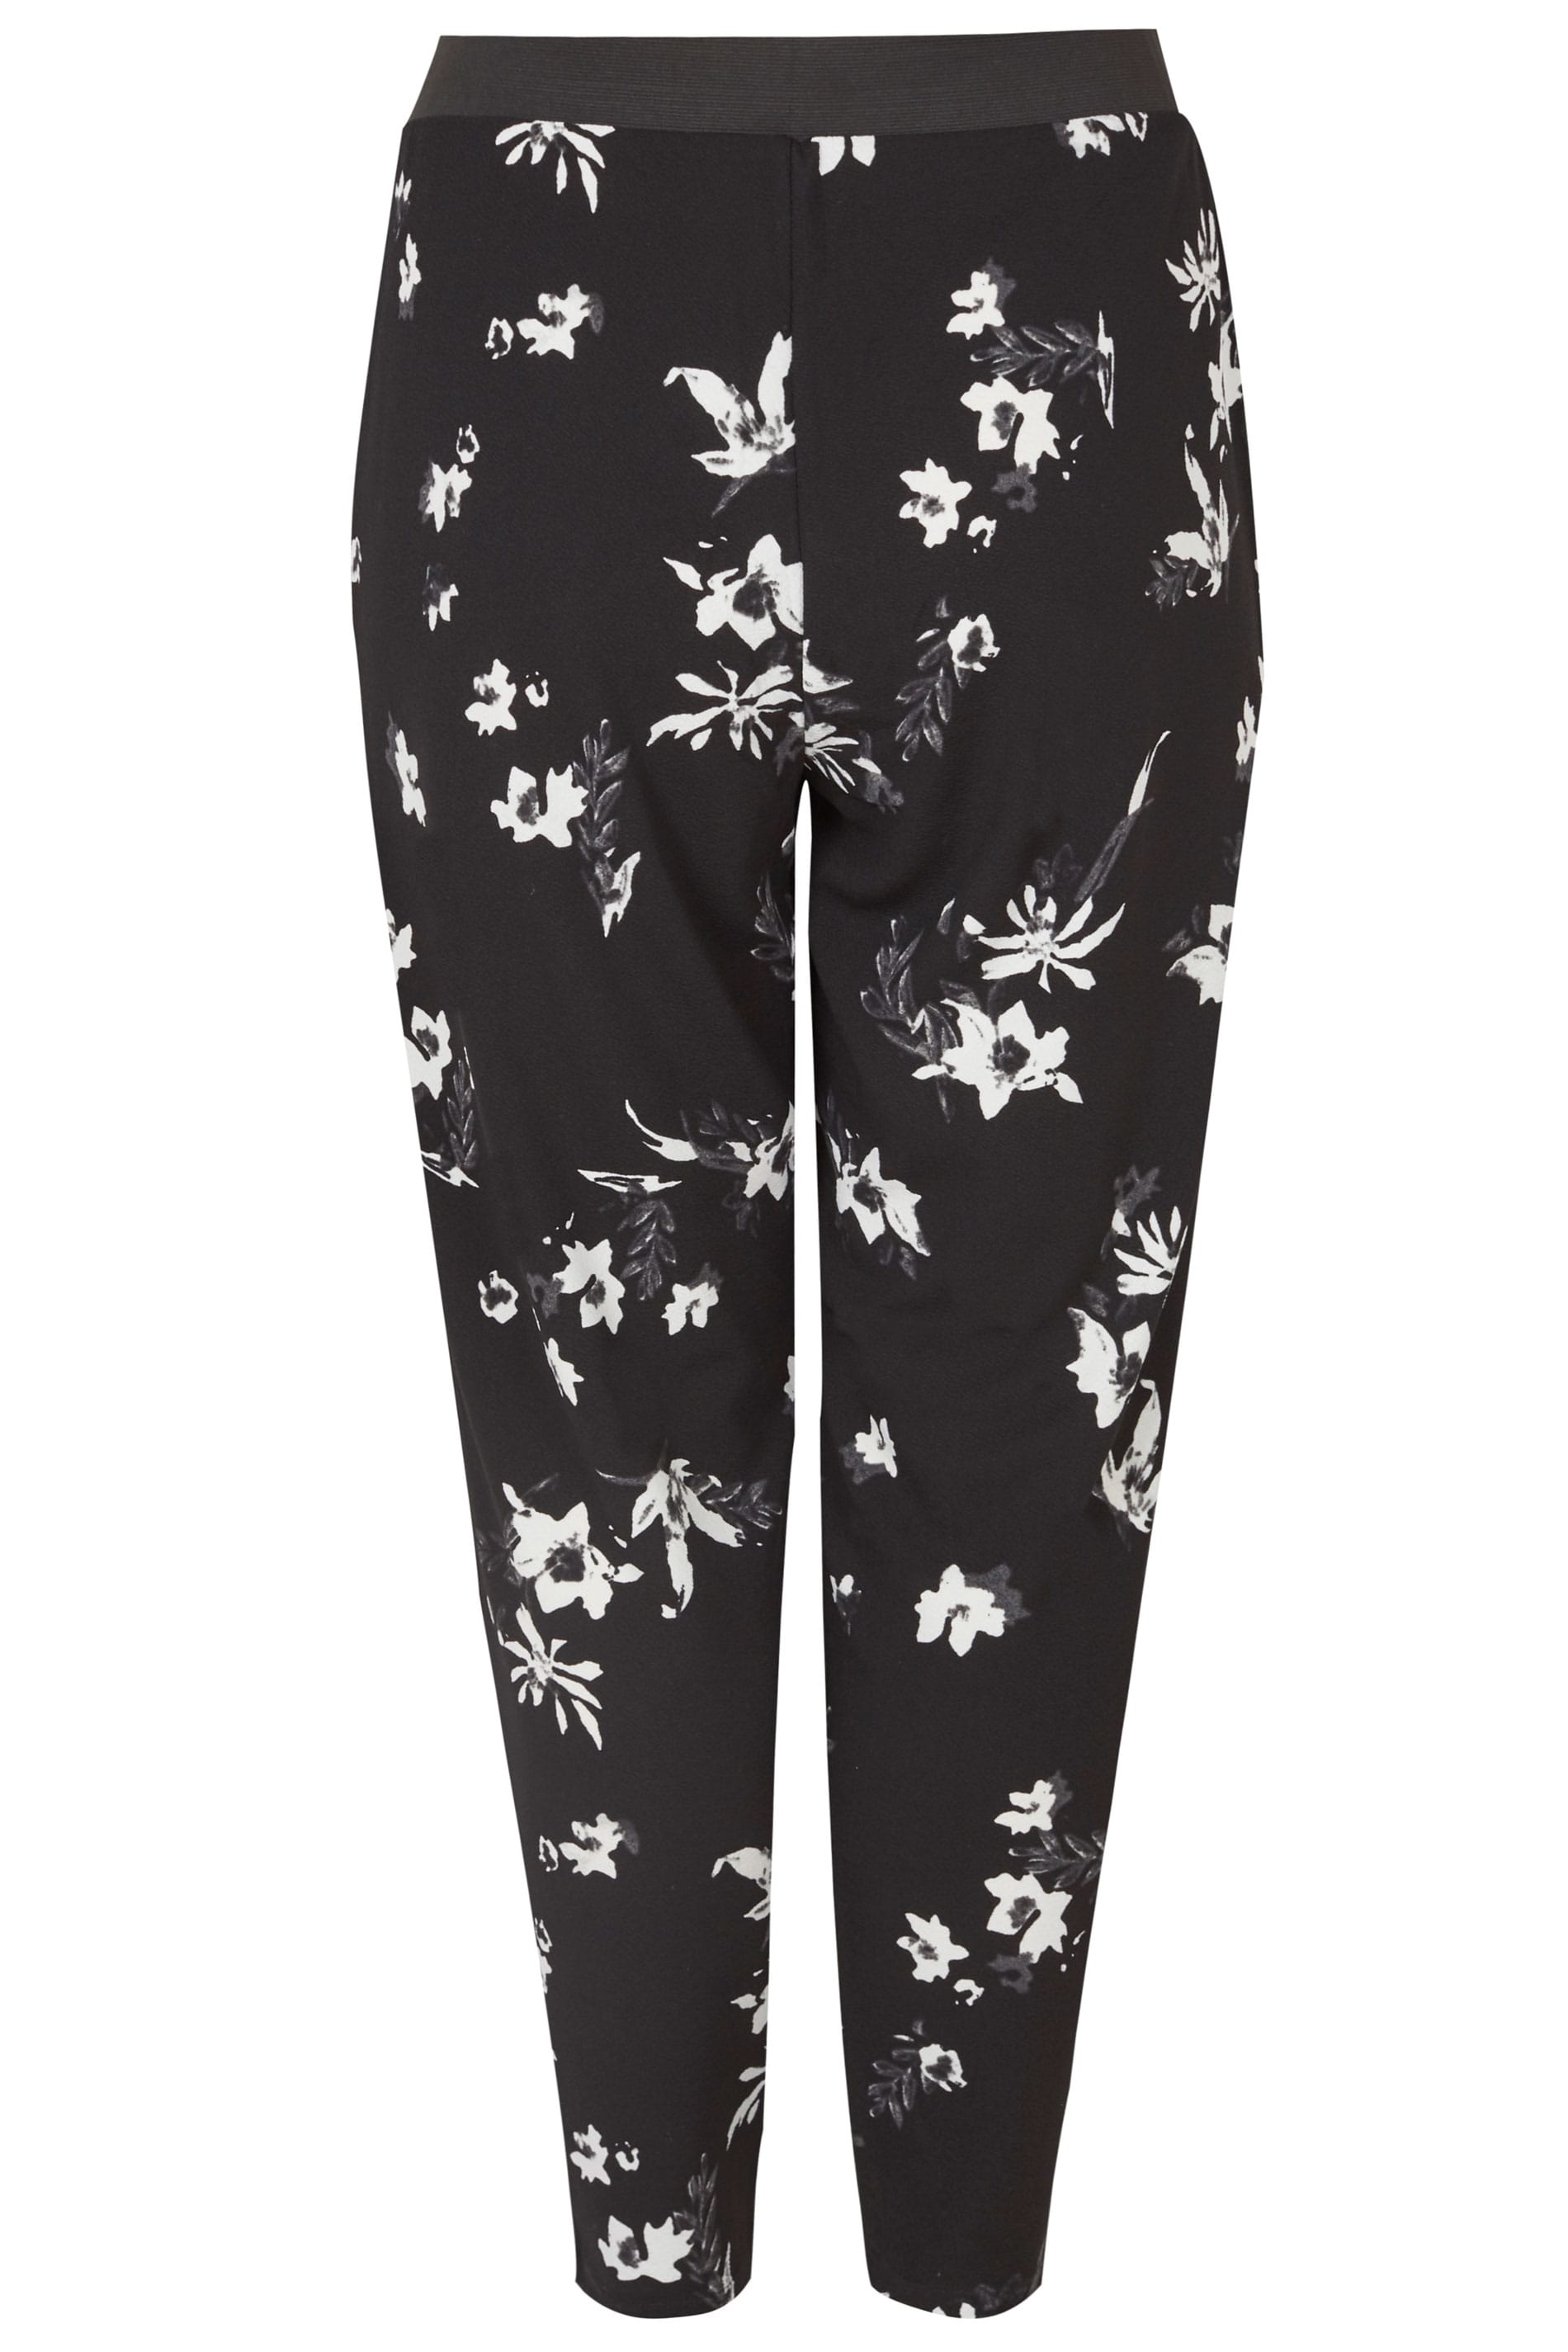 Black & White Floral Harem Trousers, plus size 16 to 36